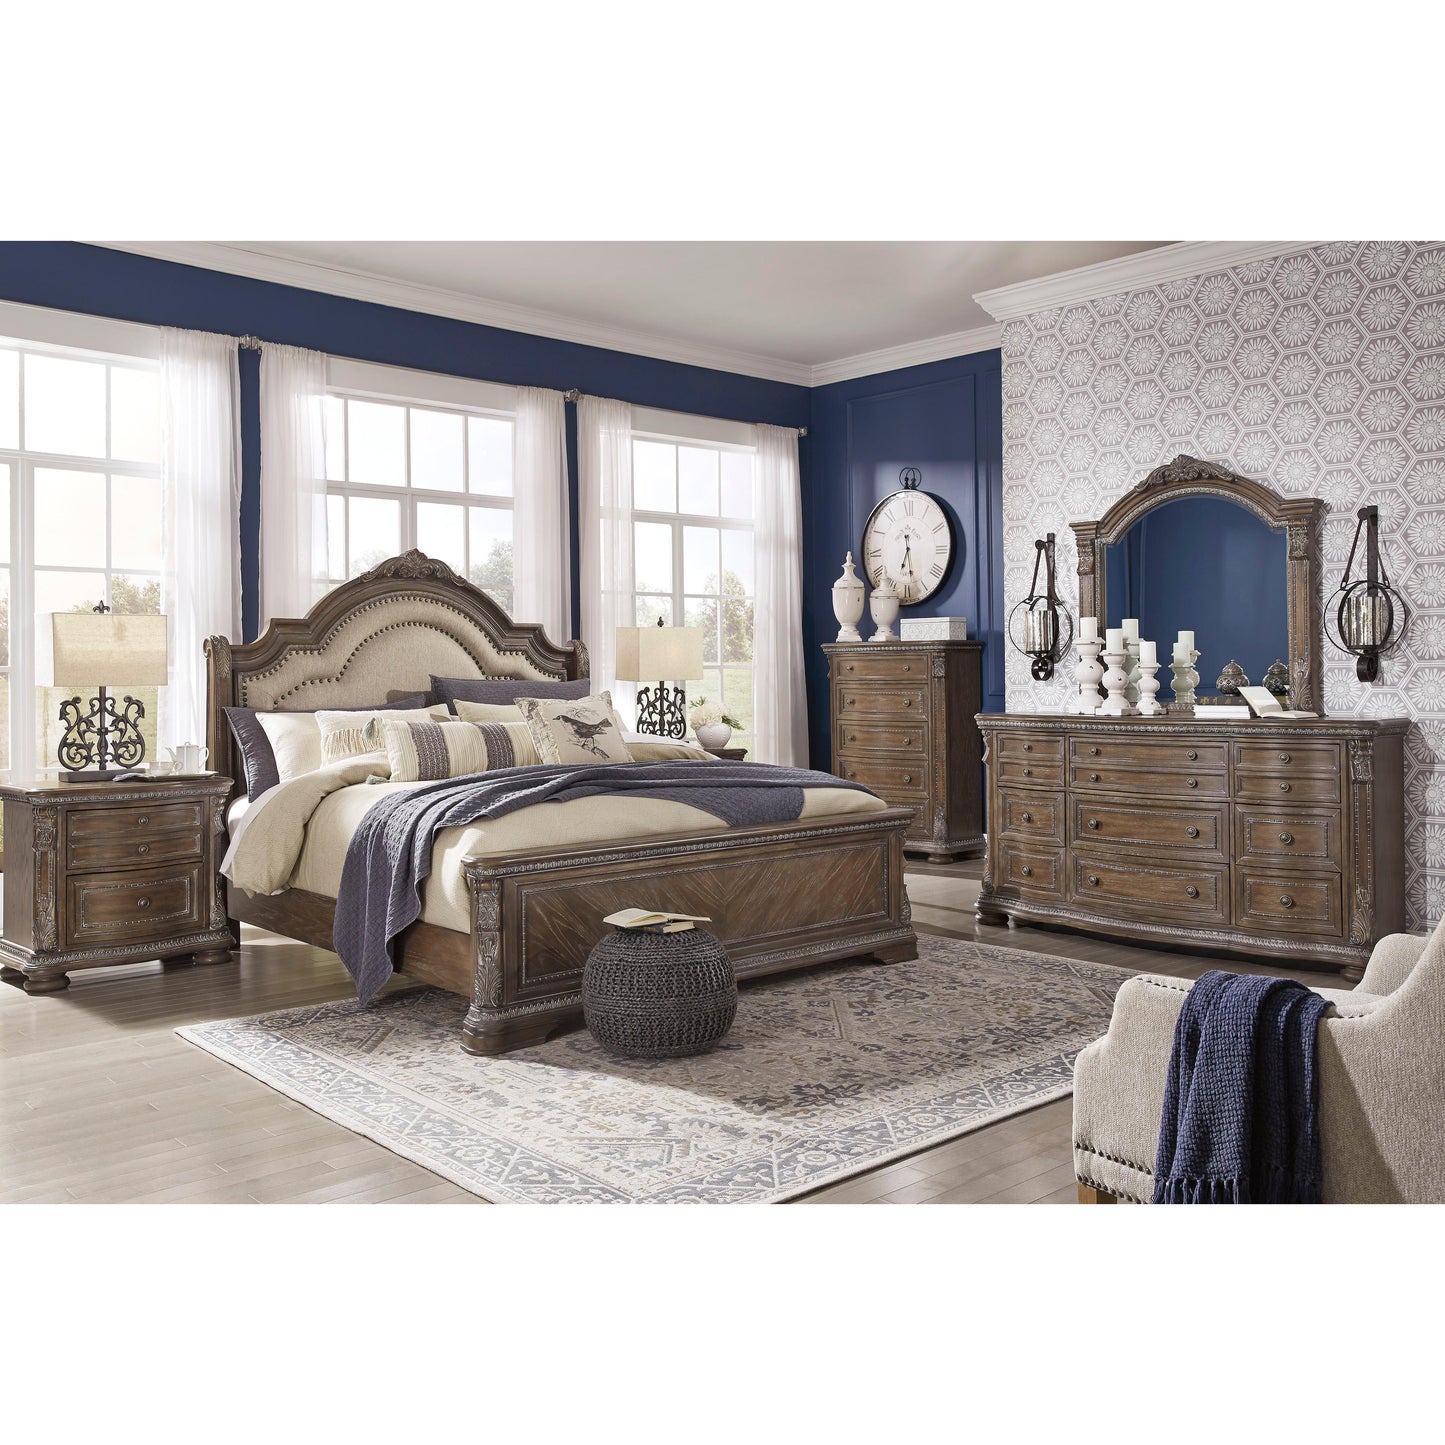 Signature Design by Ashley Charmond Queen Upholstered Sleigh Bed B803-57/B803-54/B803-96